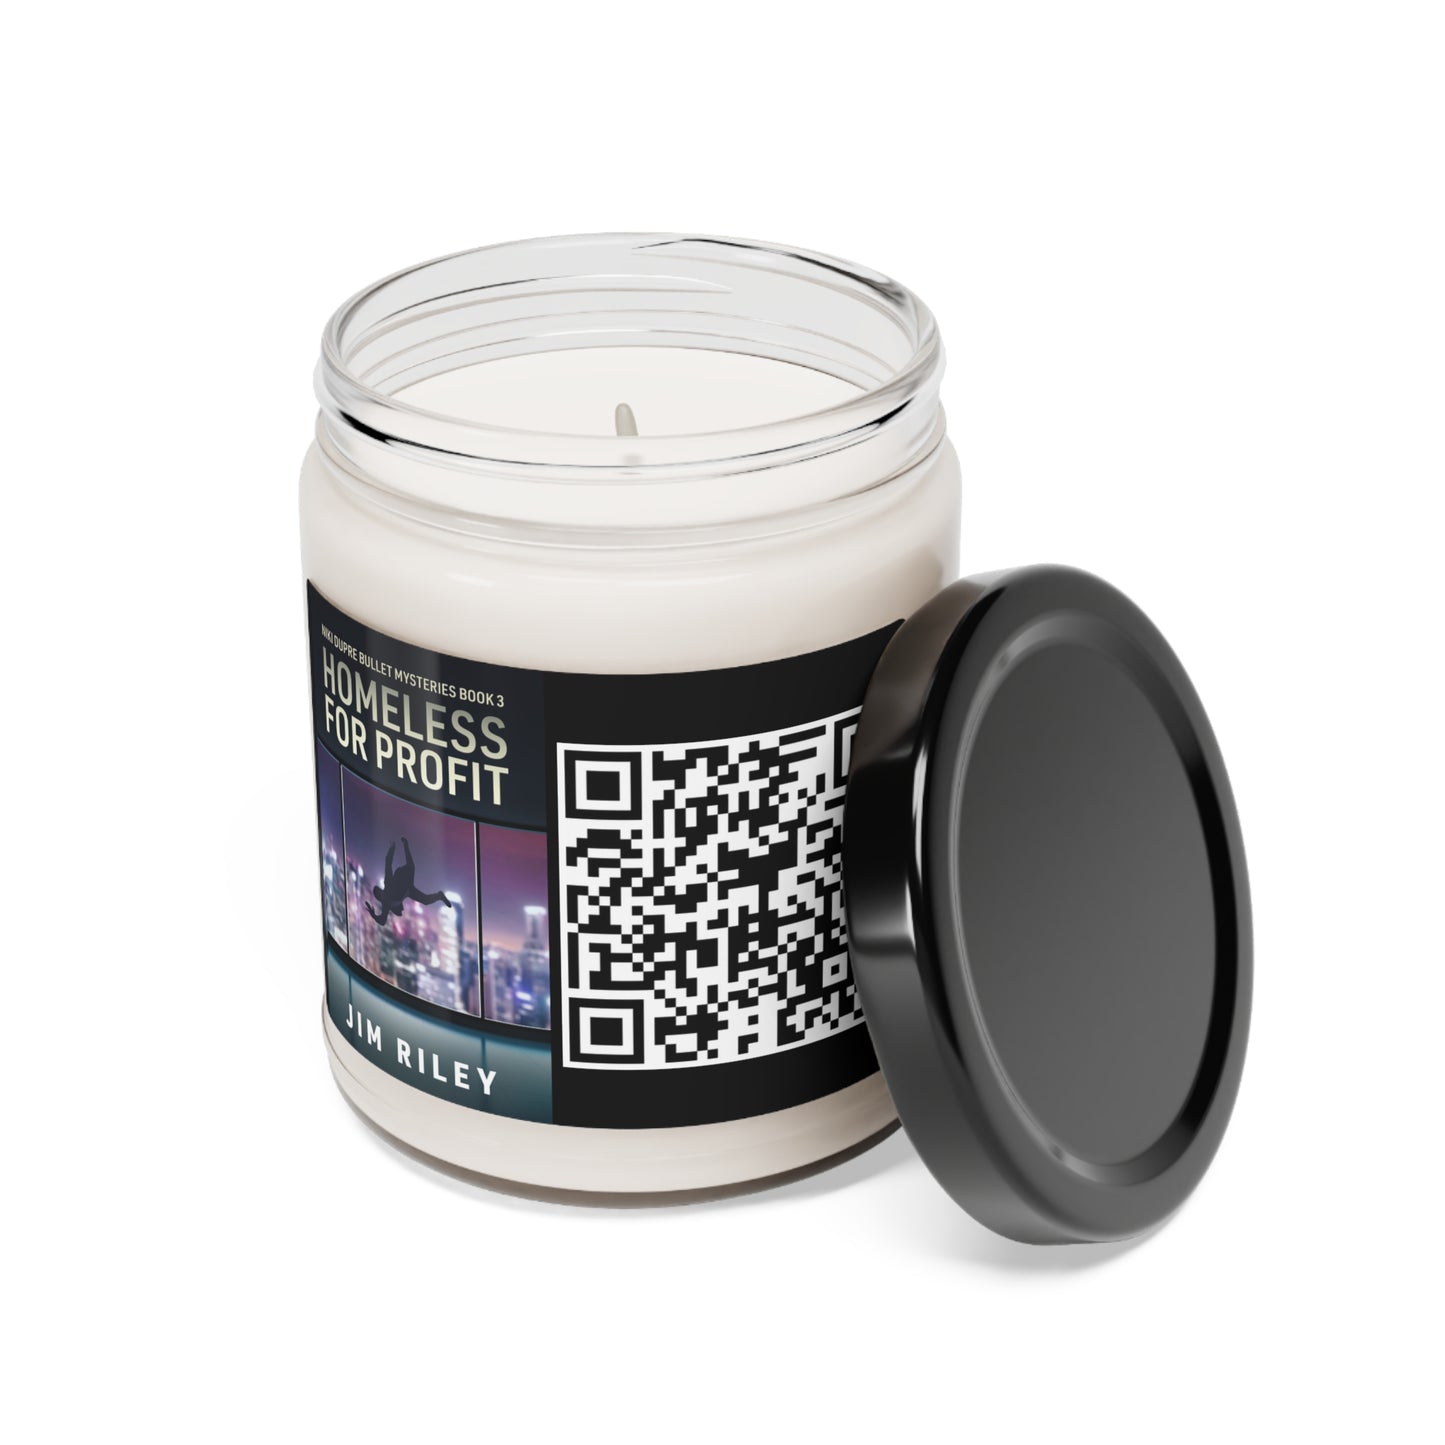 Homeless For Profit - Scented Soy Candle